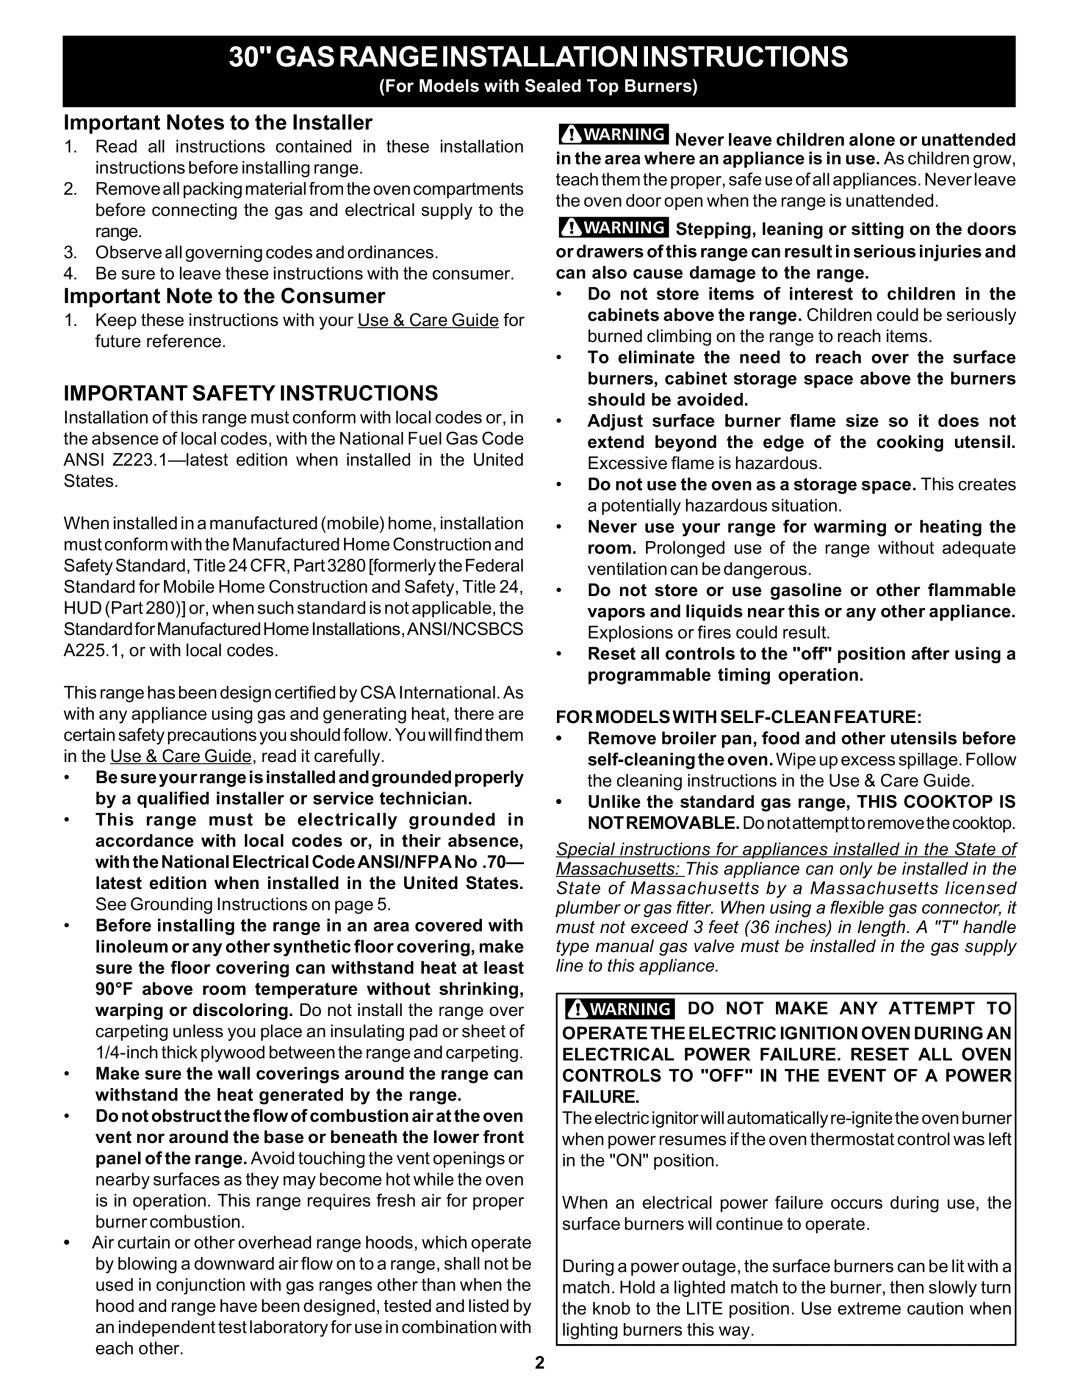 Bosch Appliances HGS5053UC Important Notes to the Installer, Important Note to the Consumer, Important Safety Instructions 